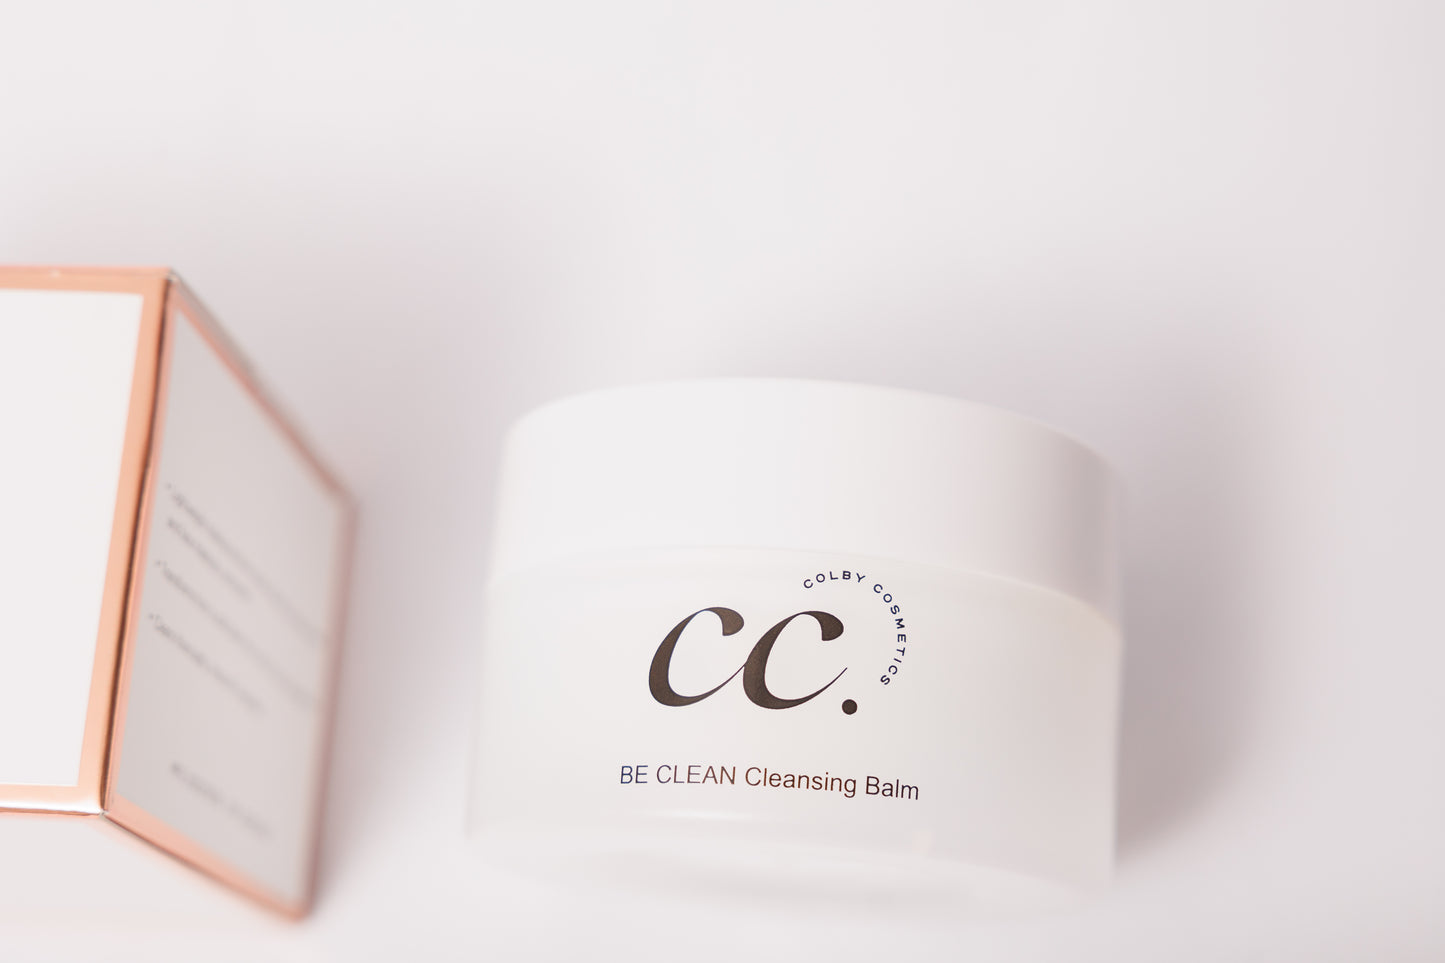 BE CLEAN Cleansing Balm